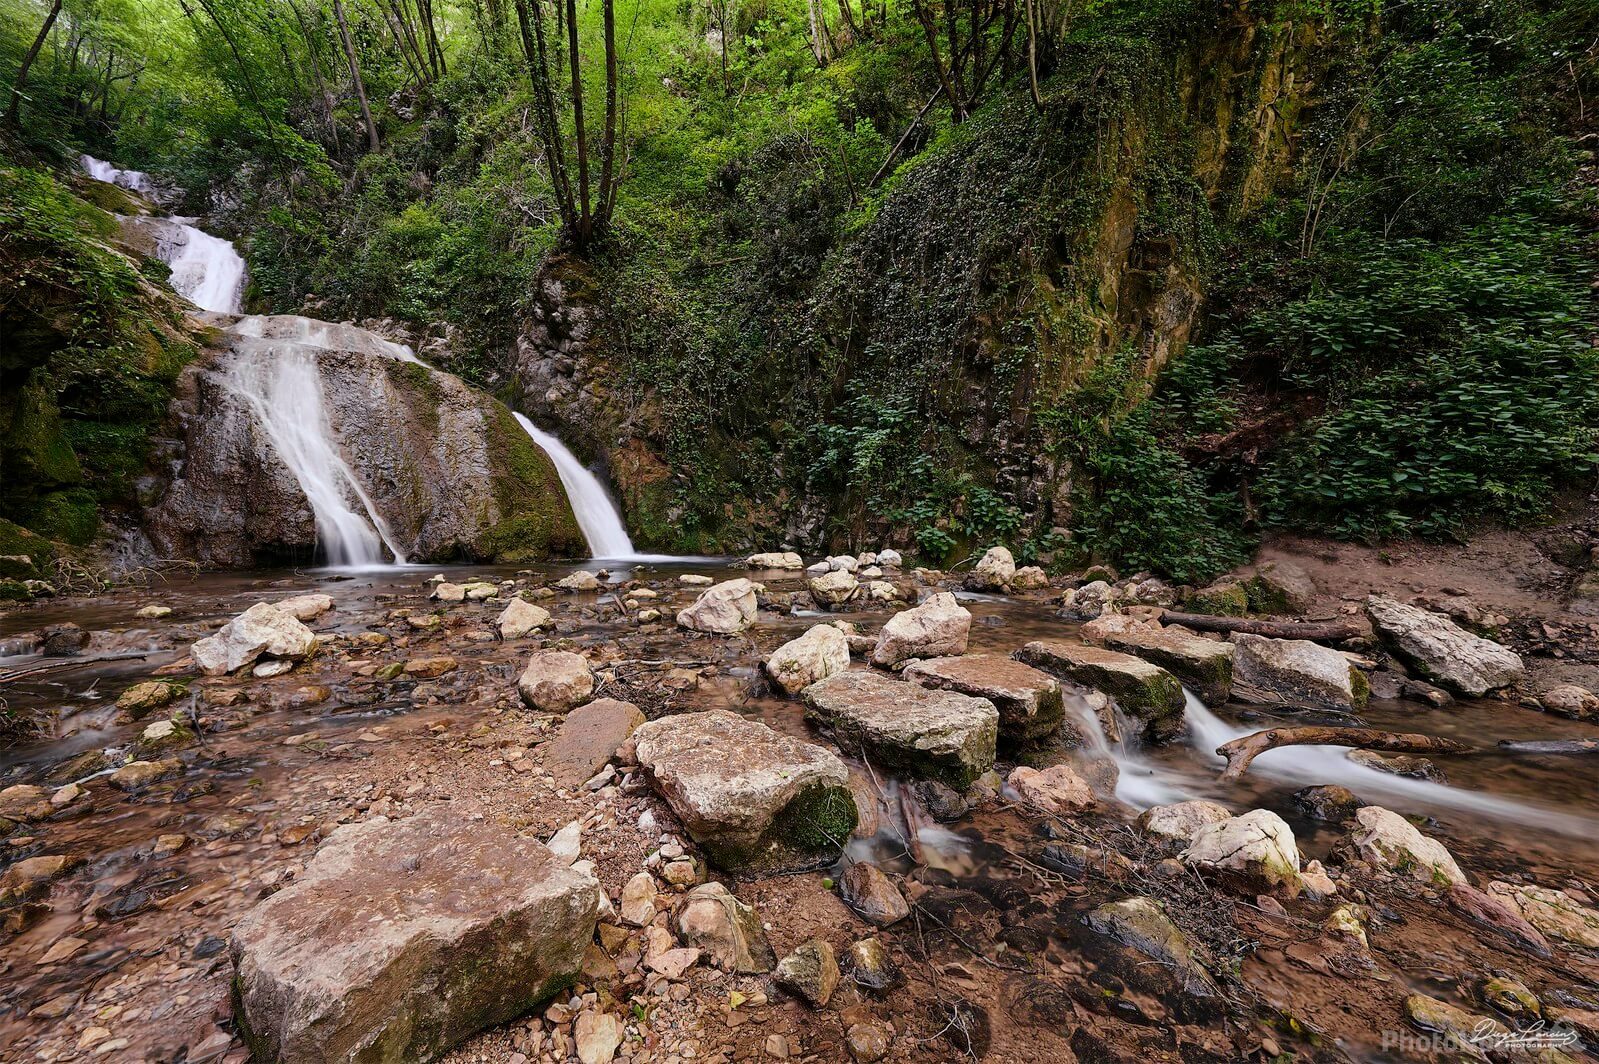 Image of Silan waterfall by Diego Lancini